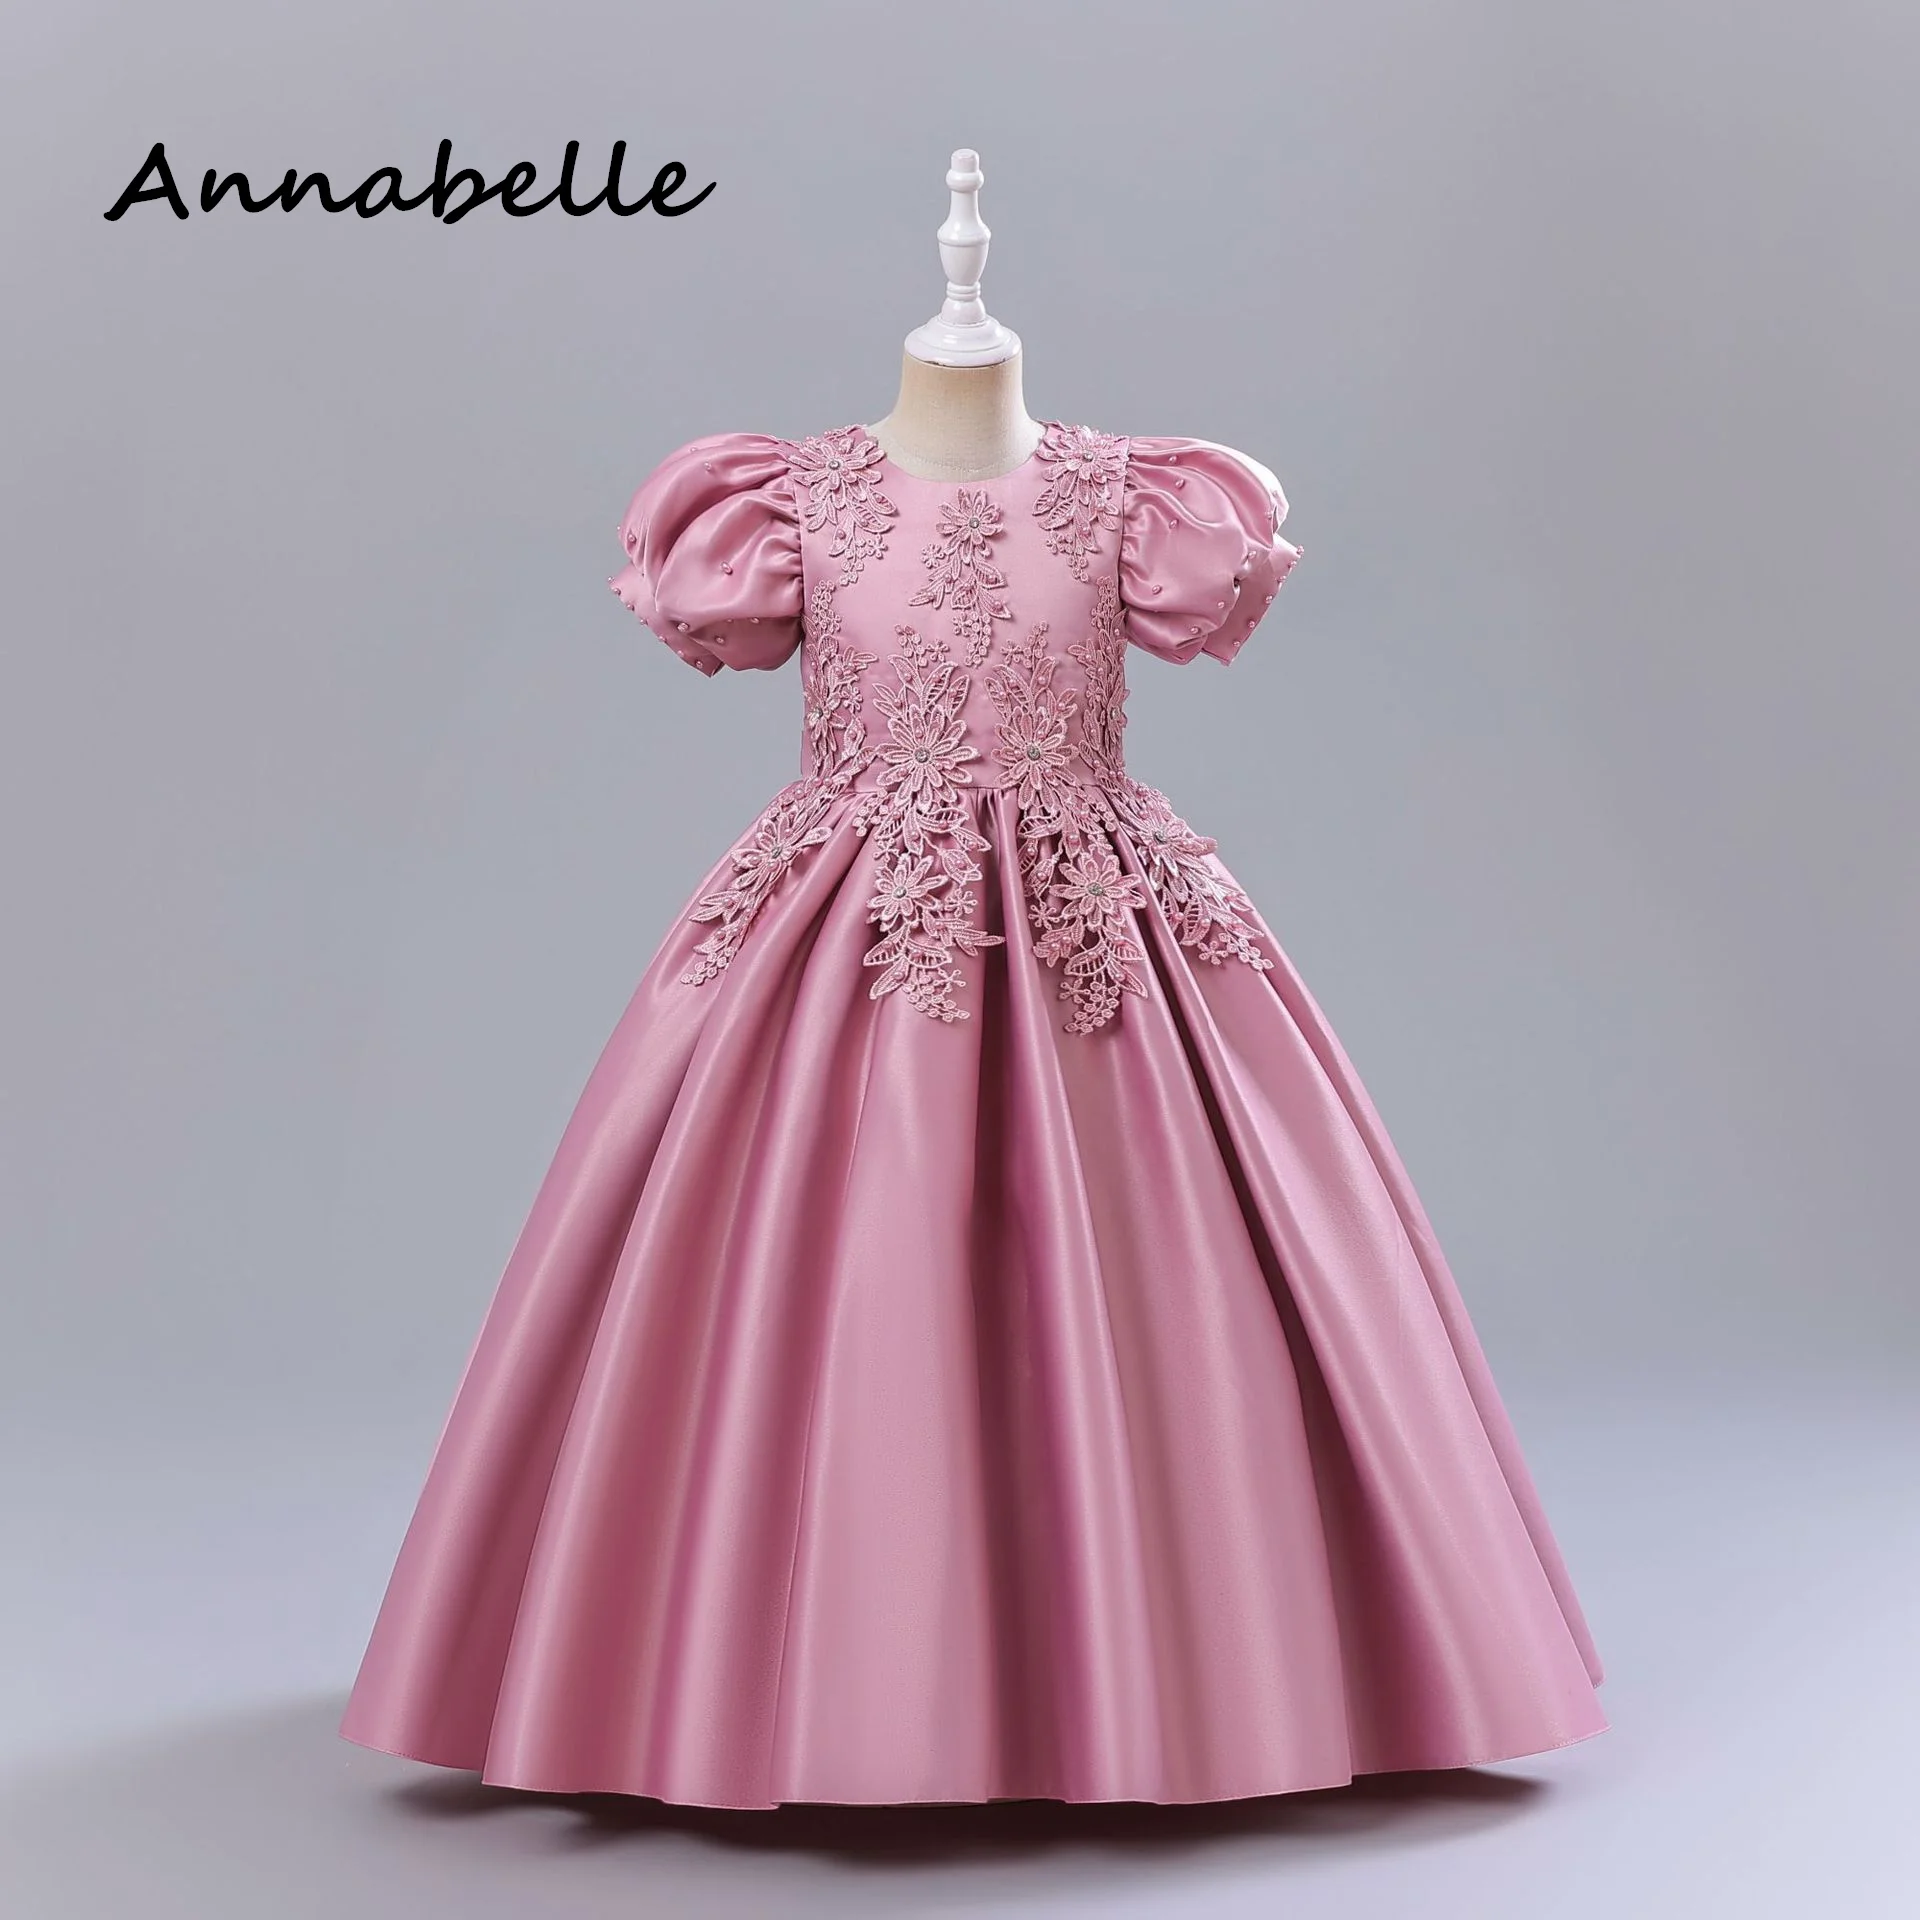 

Annabelle Flower Girl Princess Dress Baby Girl Ceremony Birthday Short Sleeved Round Neck For Wedding Party Bridesmaid Baby Dres